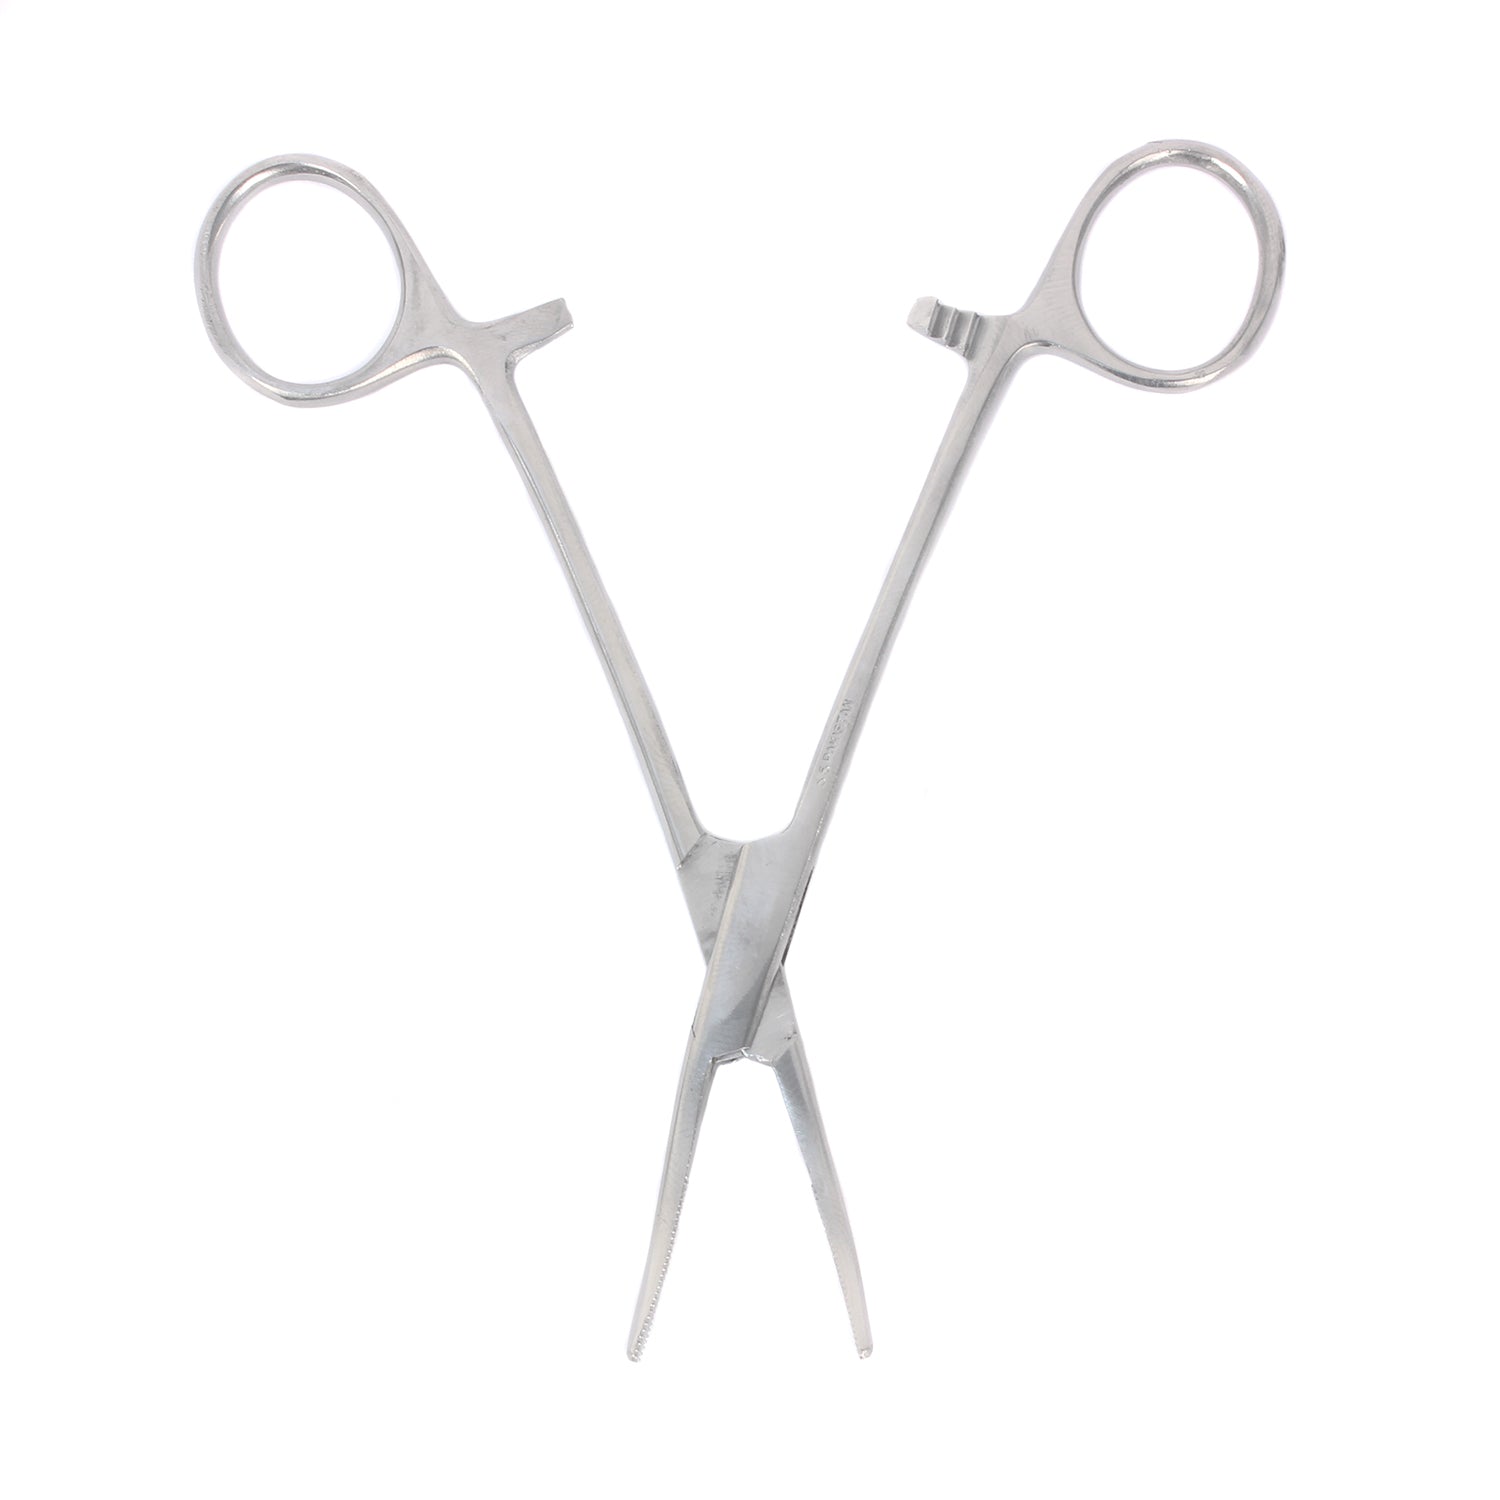 Ever Ready First Aid Kelly Forceps Curved - 5 1/2"